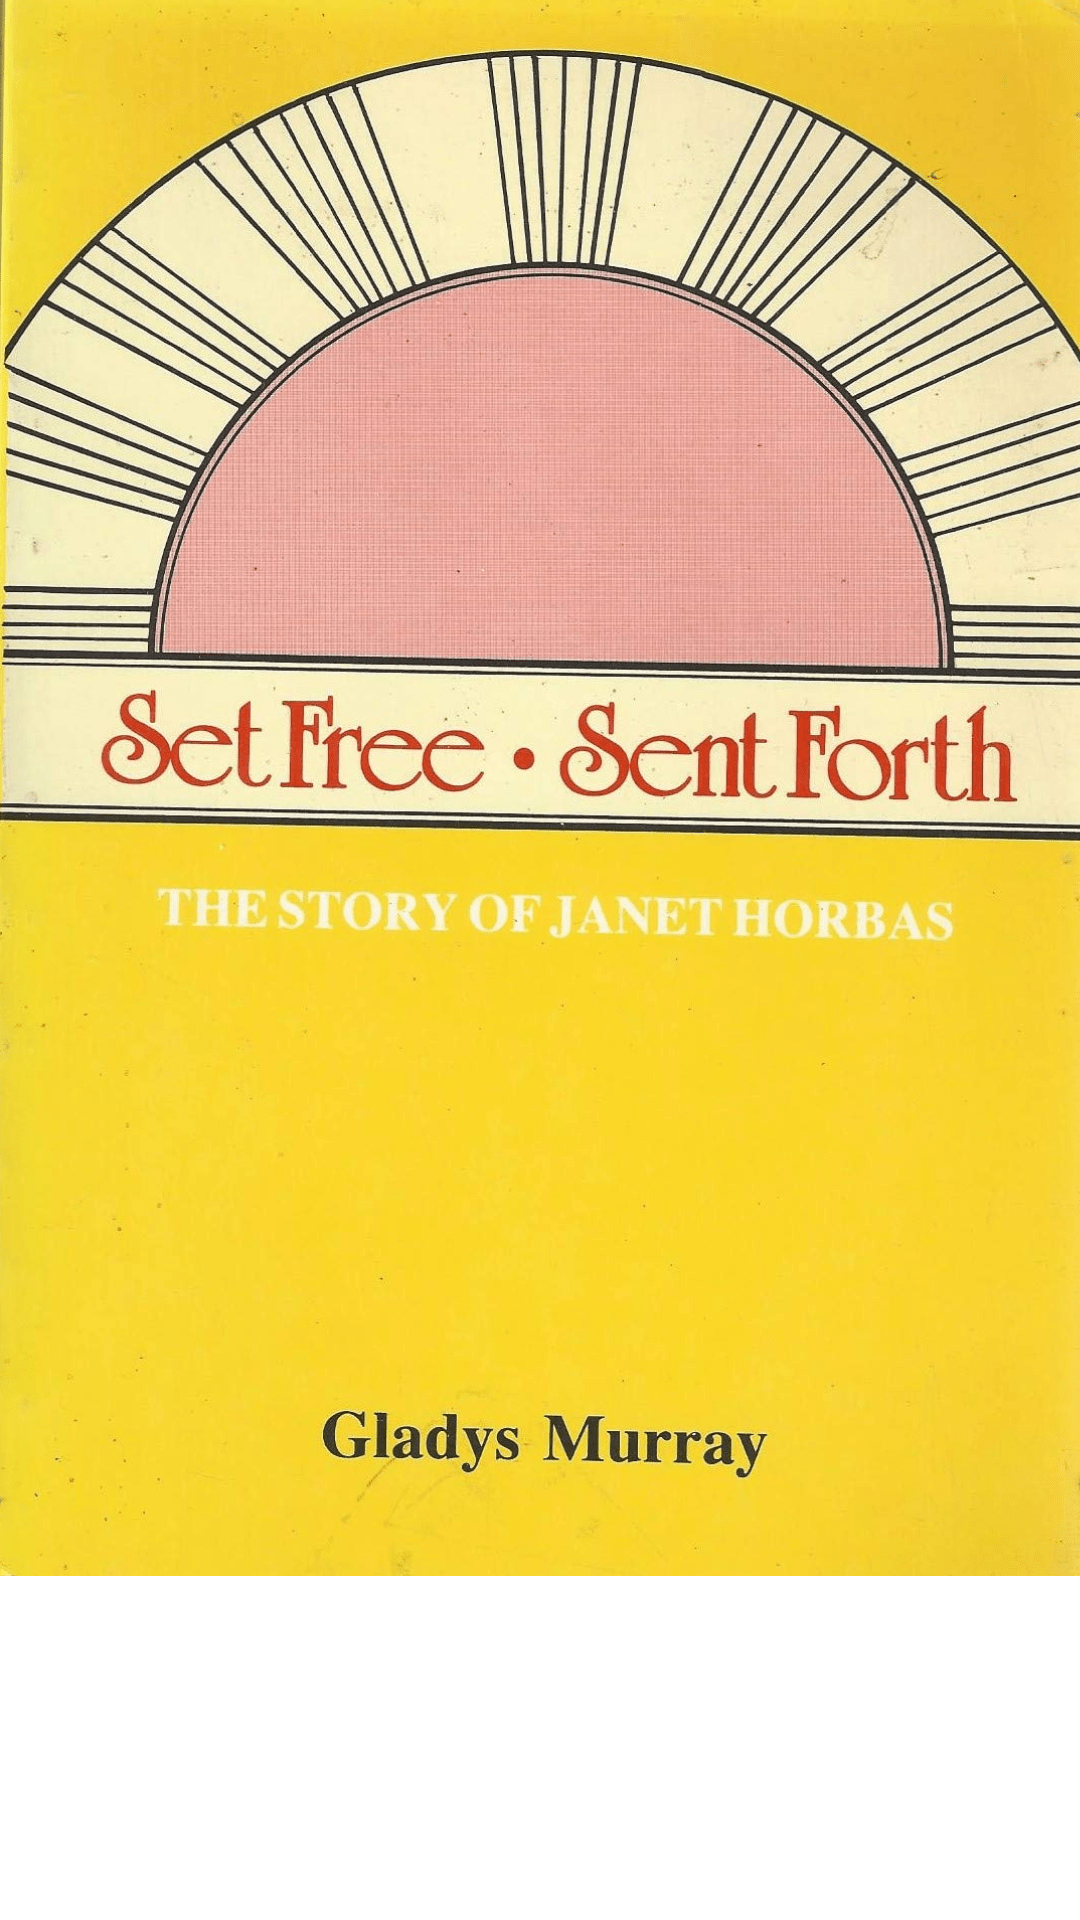 Set Free - Sent Forth: The Story of Janet Horbas